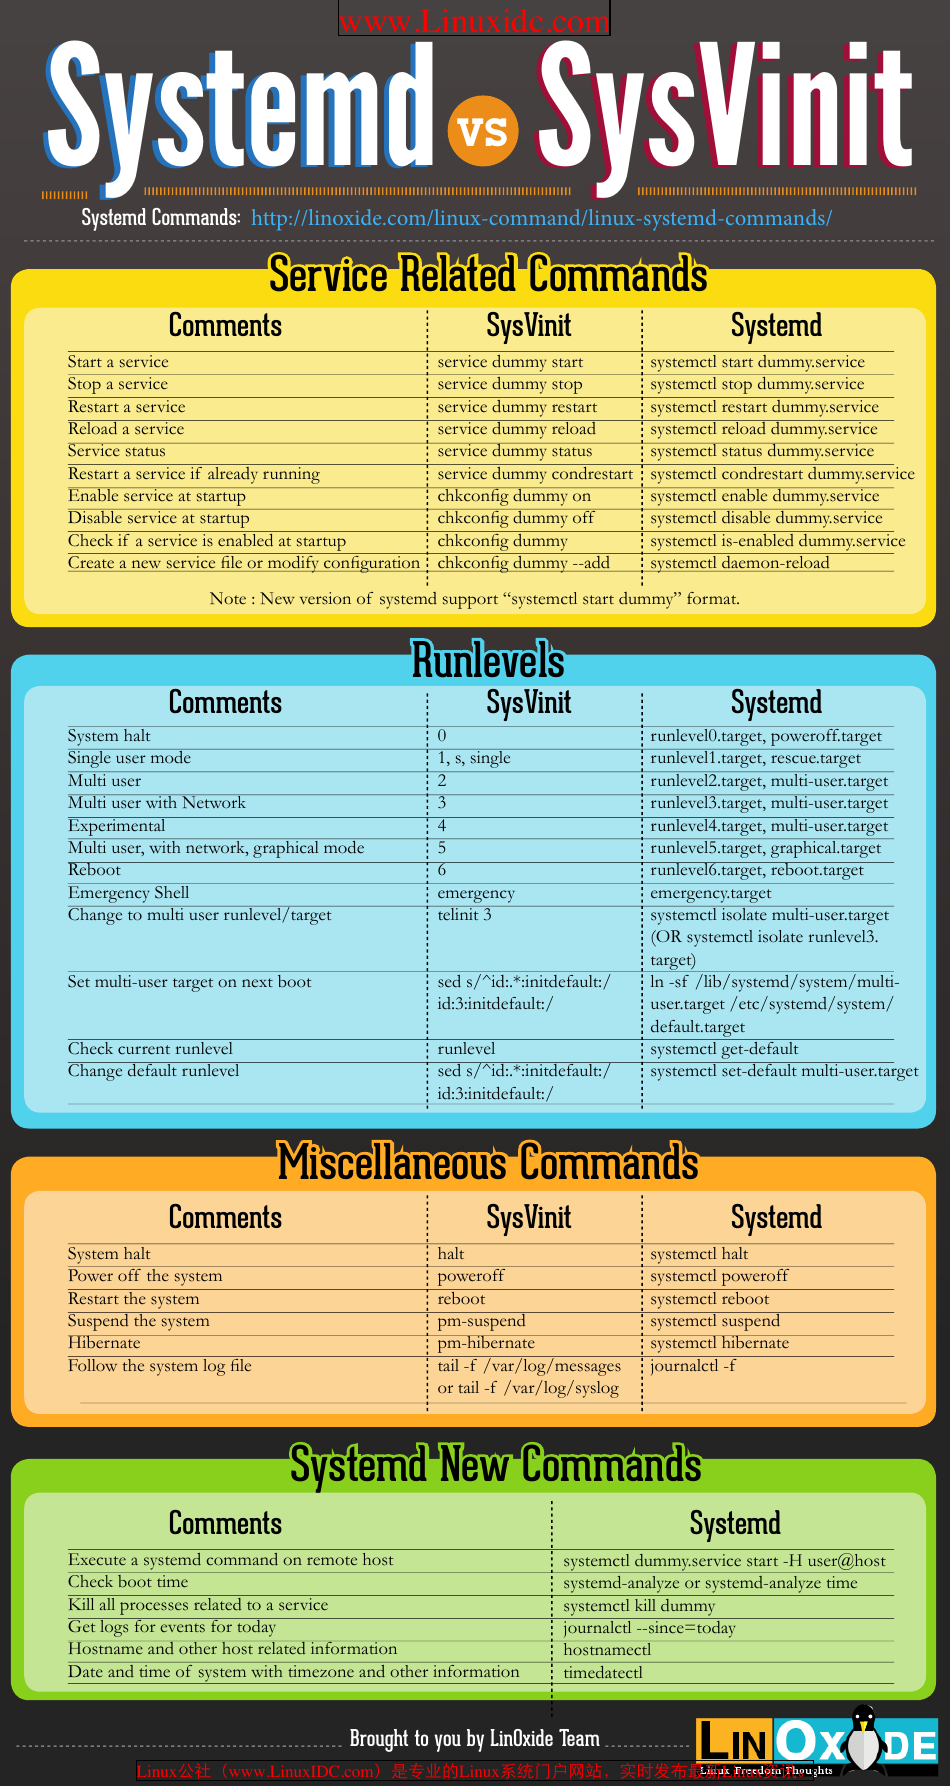 Comparison between Systemd and Sysvinit commands